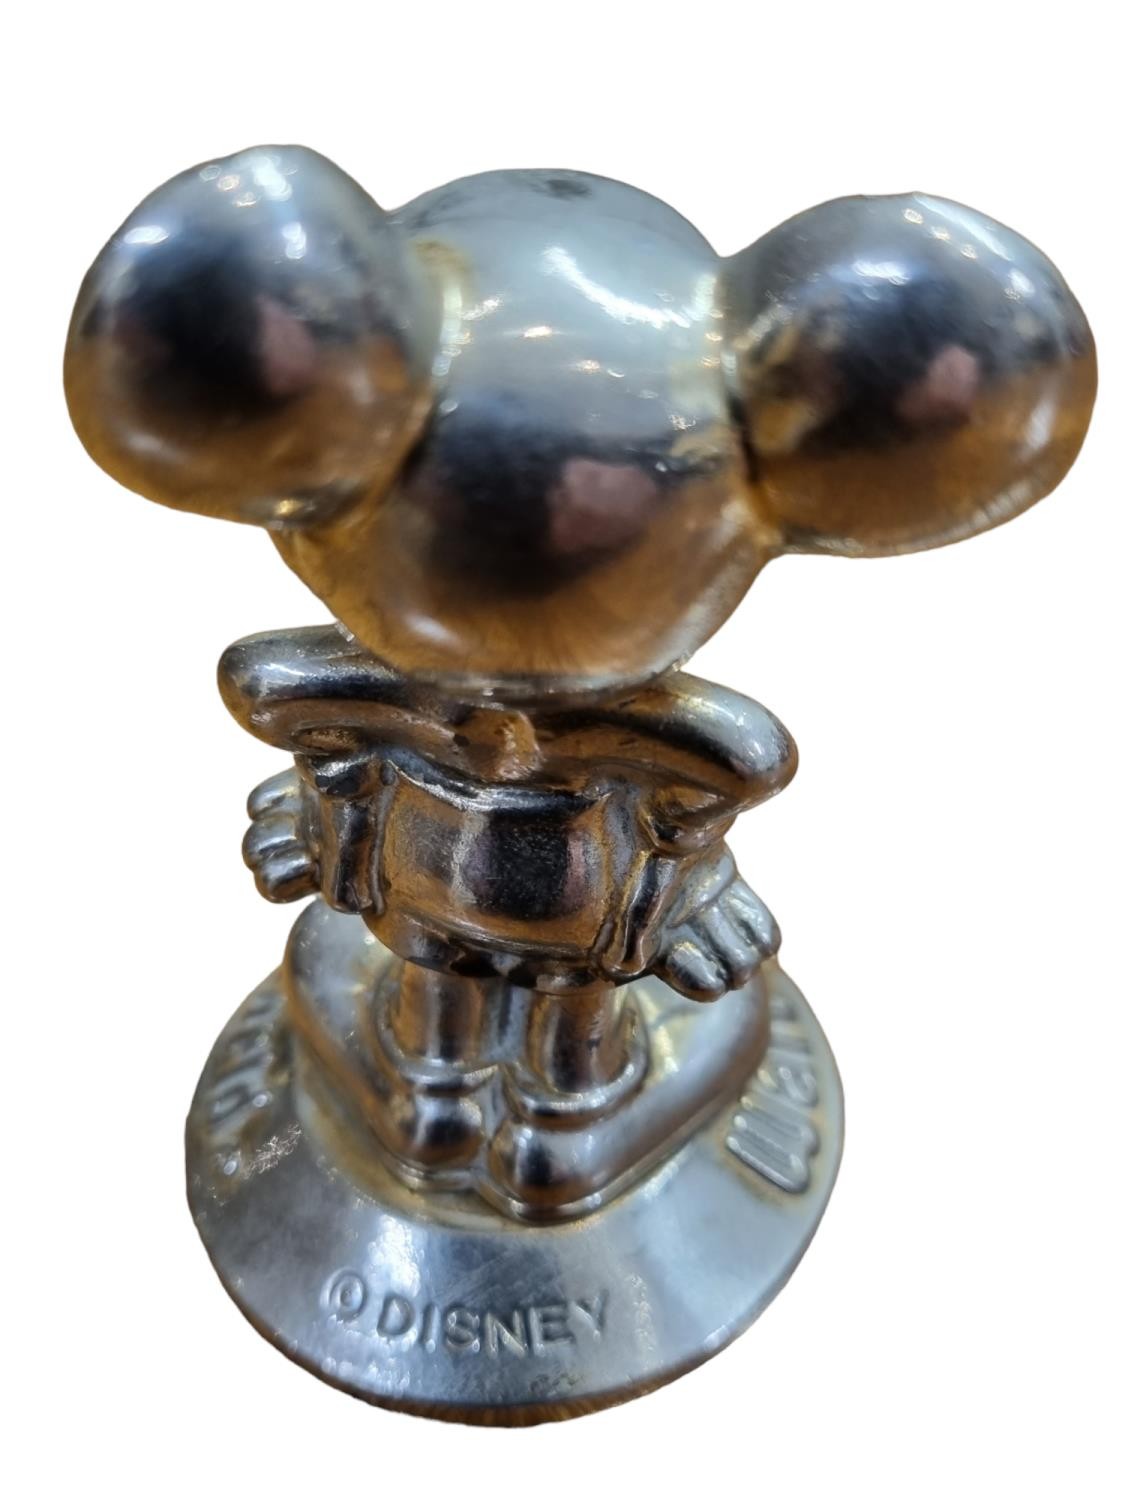 Disney: Collectable Silvered Cast Metal Mickey Mouse - Image 2 of 2